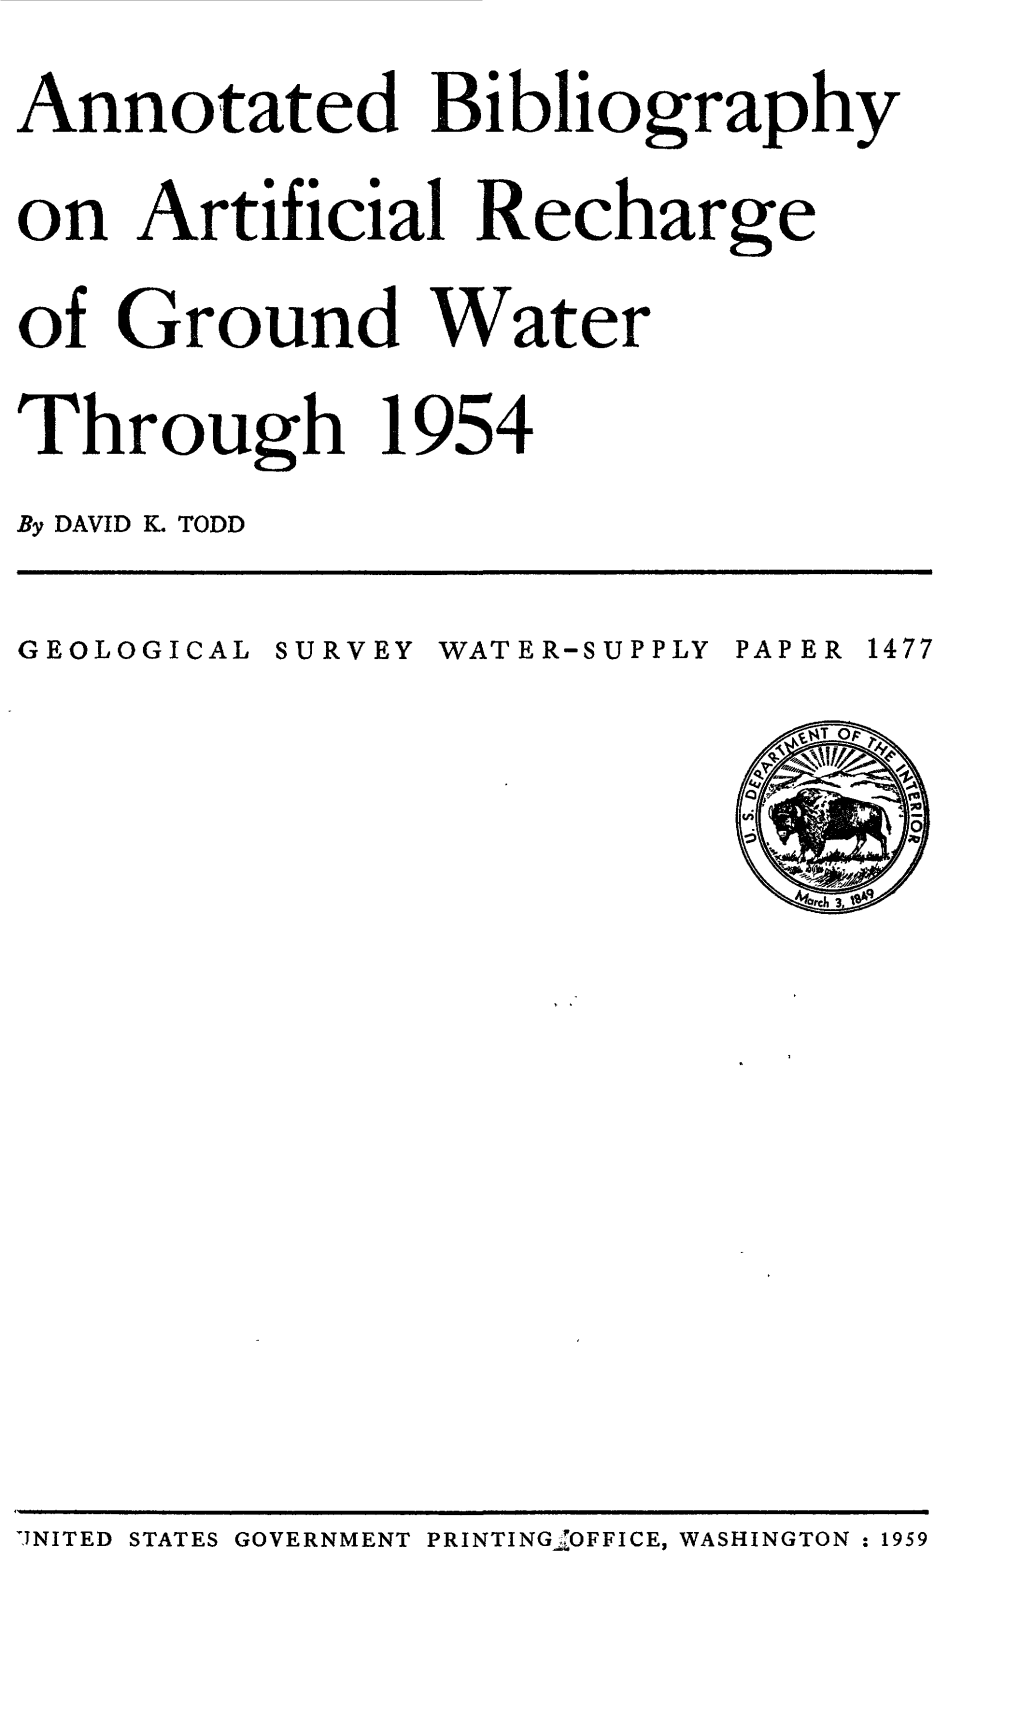 Annotated Bibliography on Artificial Recharge of Ground Water Through 1954